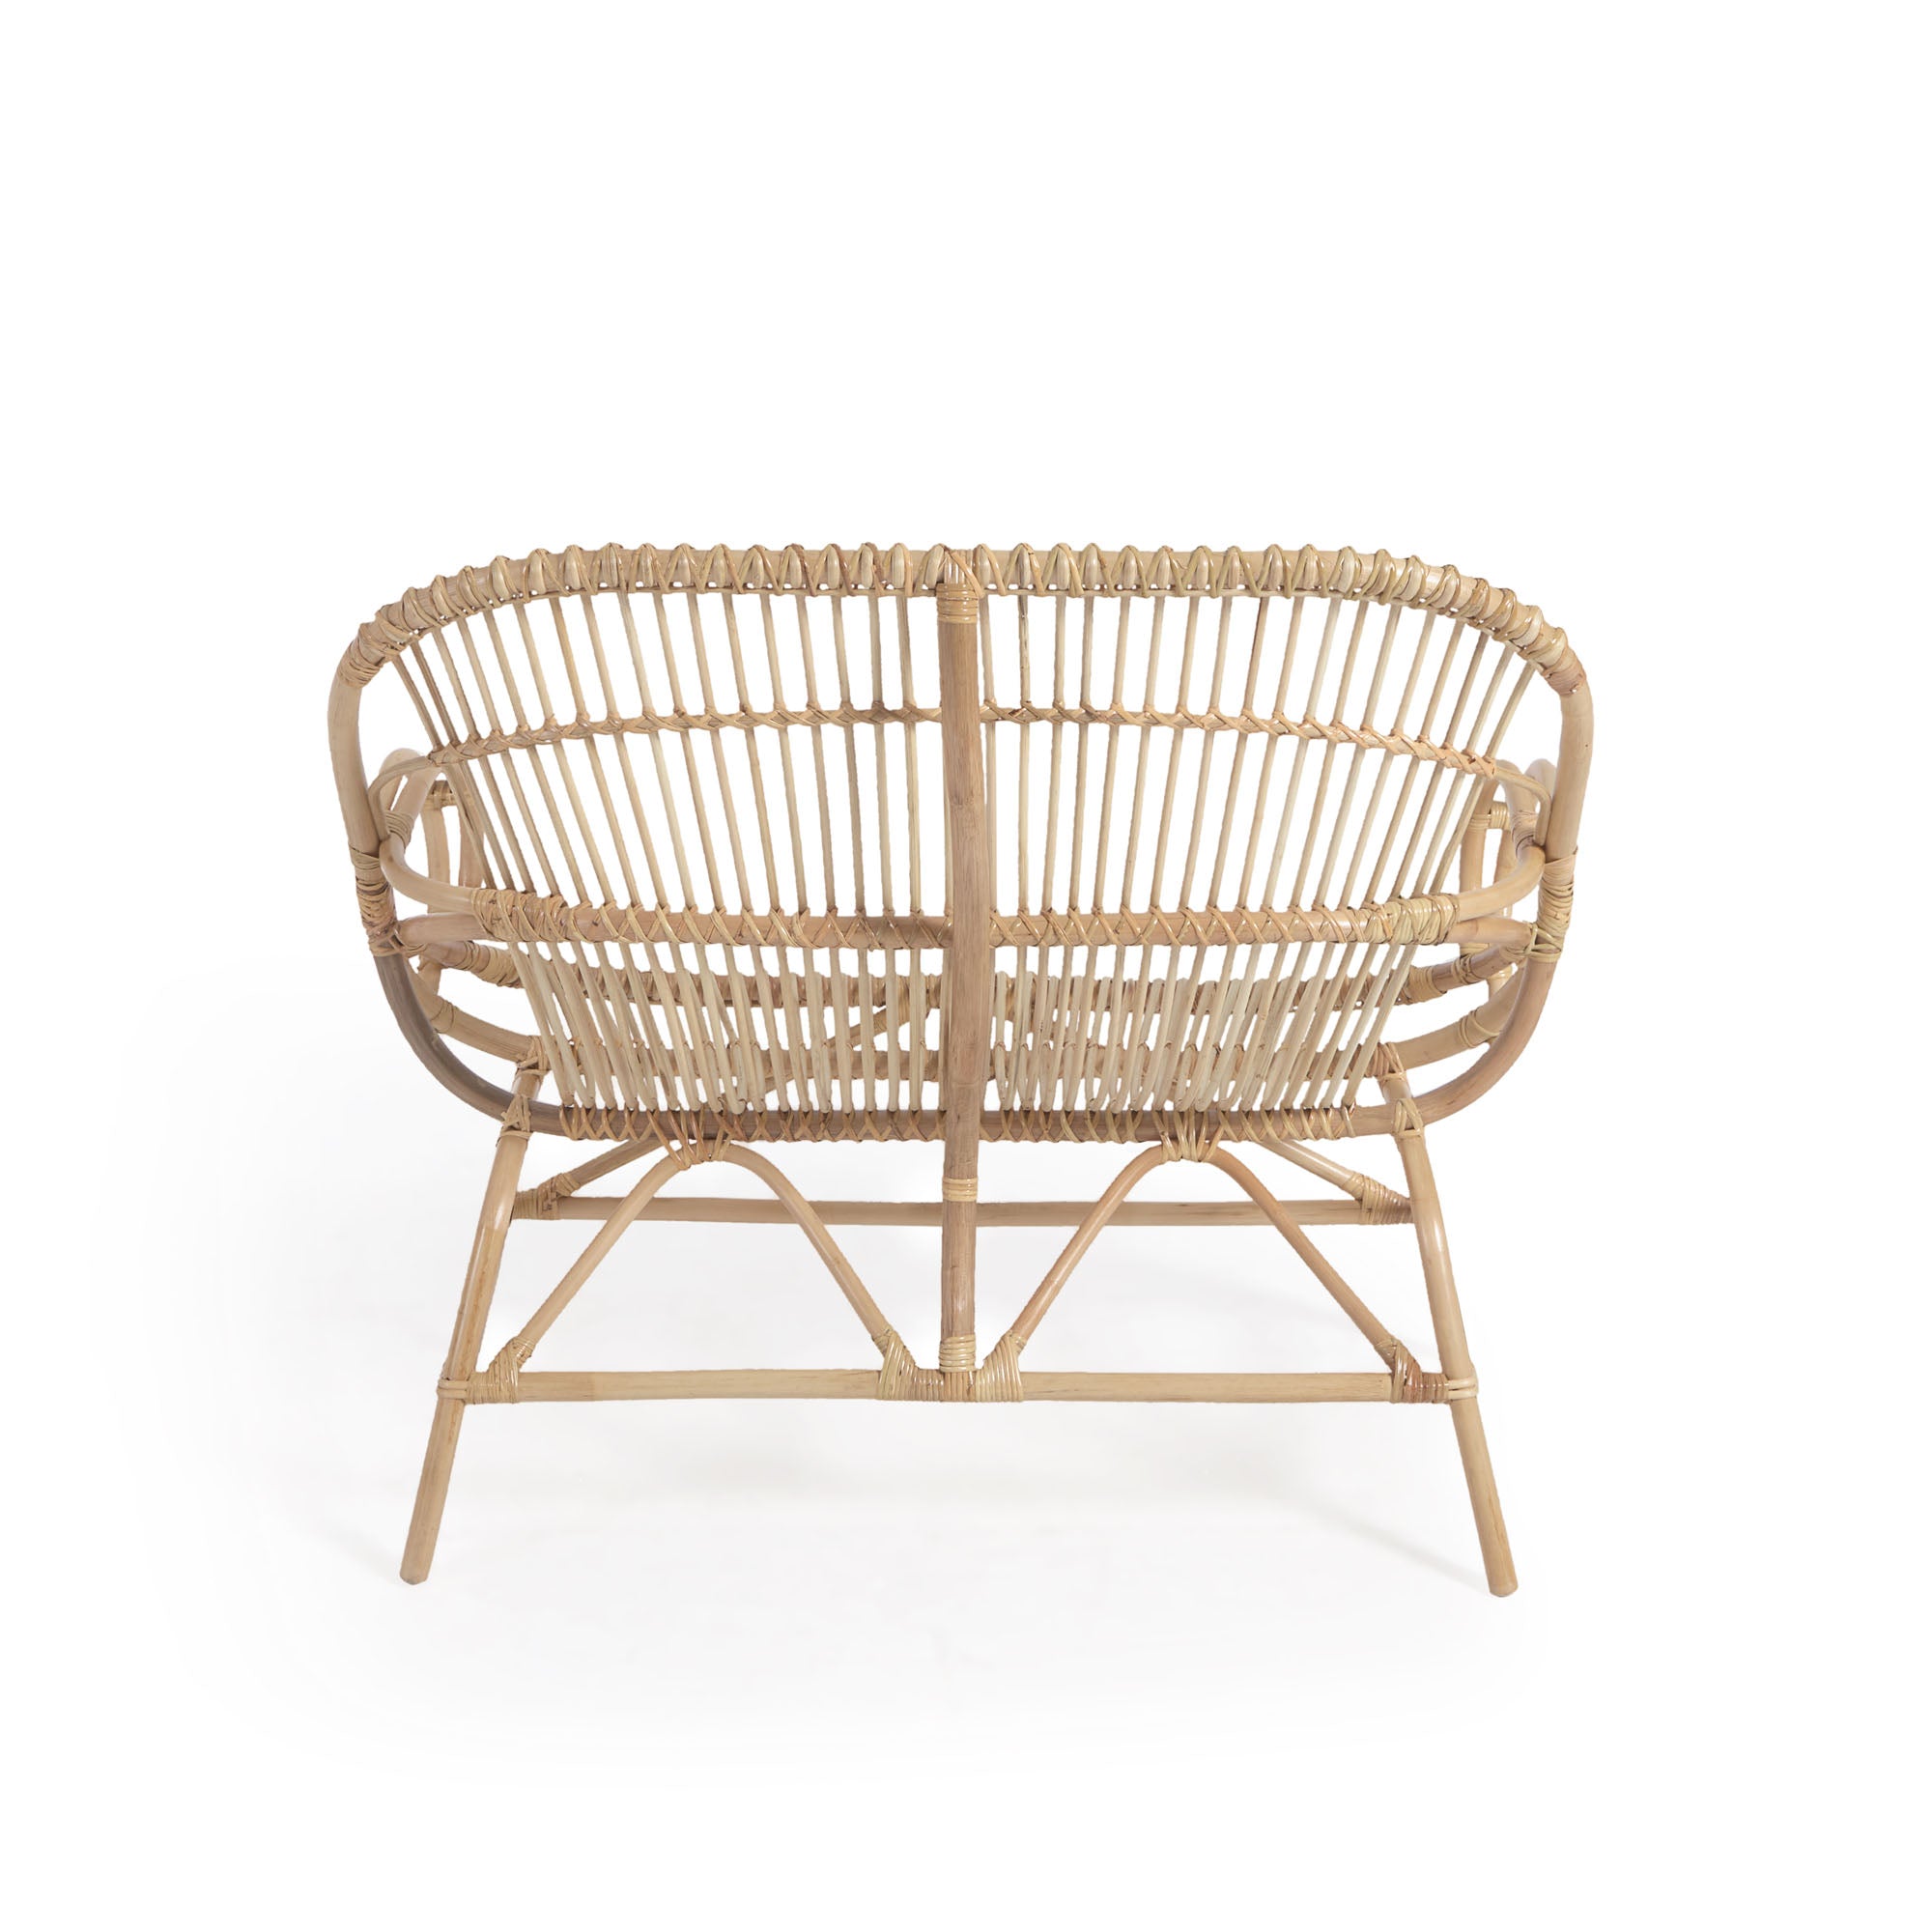 Mimosa rattan bench with a natural finish, 114 cm